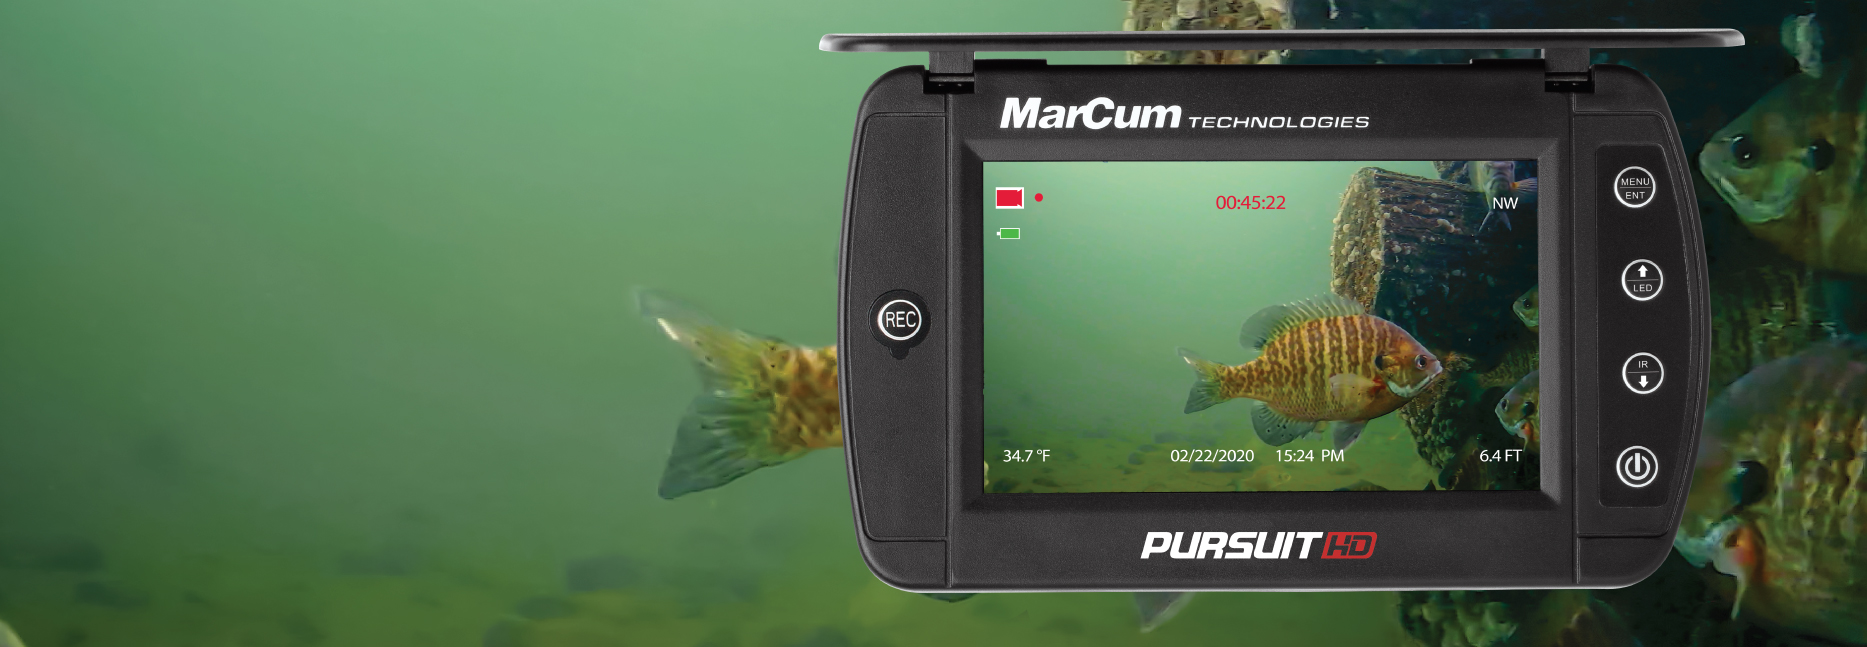 Pursuit HD UW camera quality with panfish